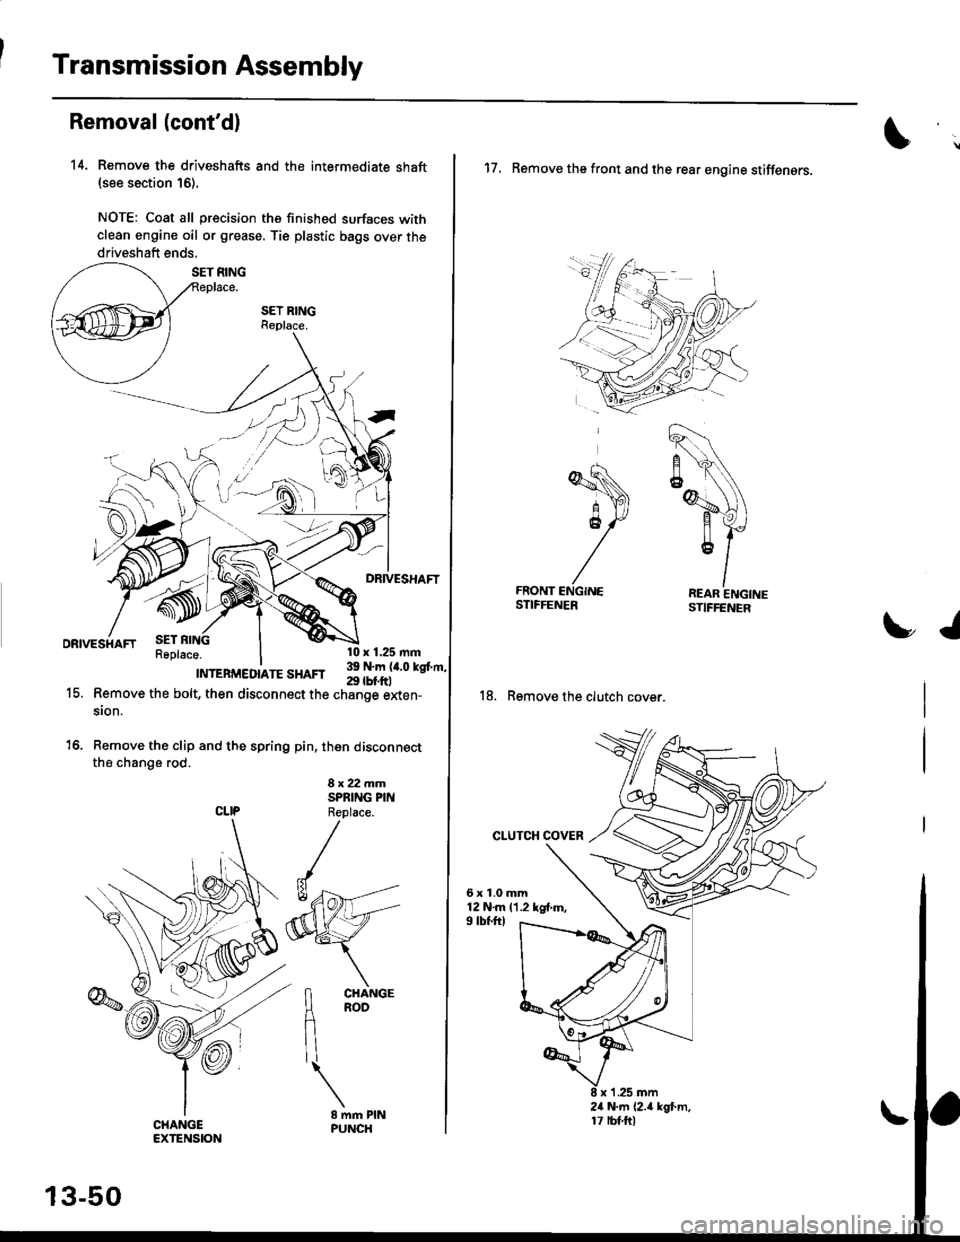 HONDA CIVIC 1996 6.G Repair Manual Transmission Assembly
Removal(contd)
14. Remove the driveshafts and the intermediate shaft(see section 16).
NOTE: Coat all precision the finished surfaces with
clean engine oil or grease. Tie plastic